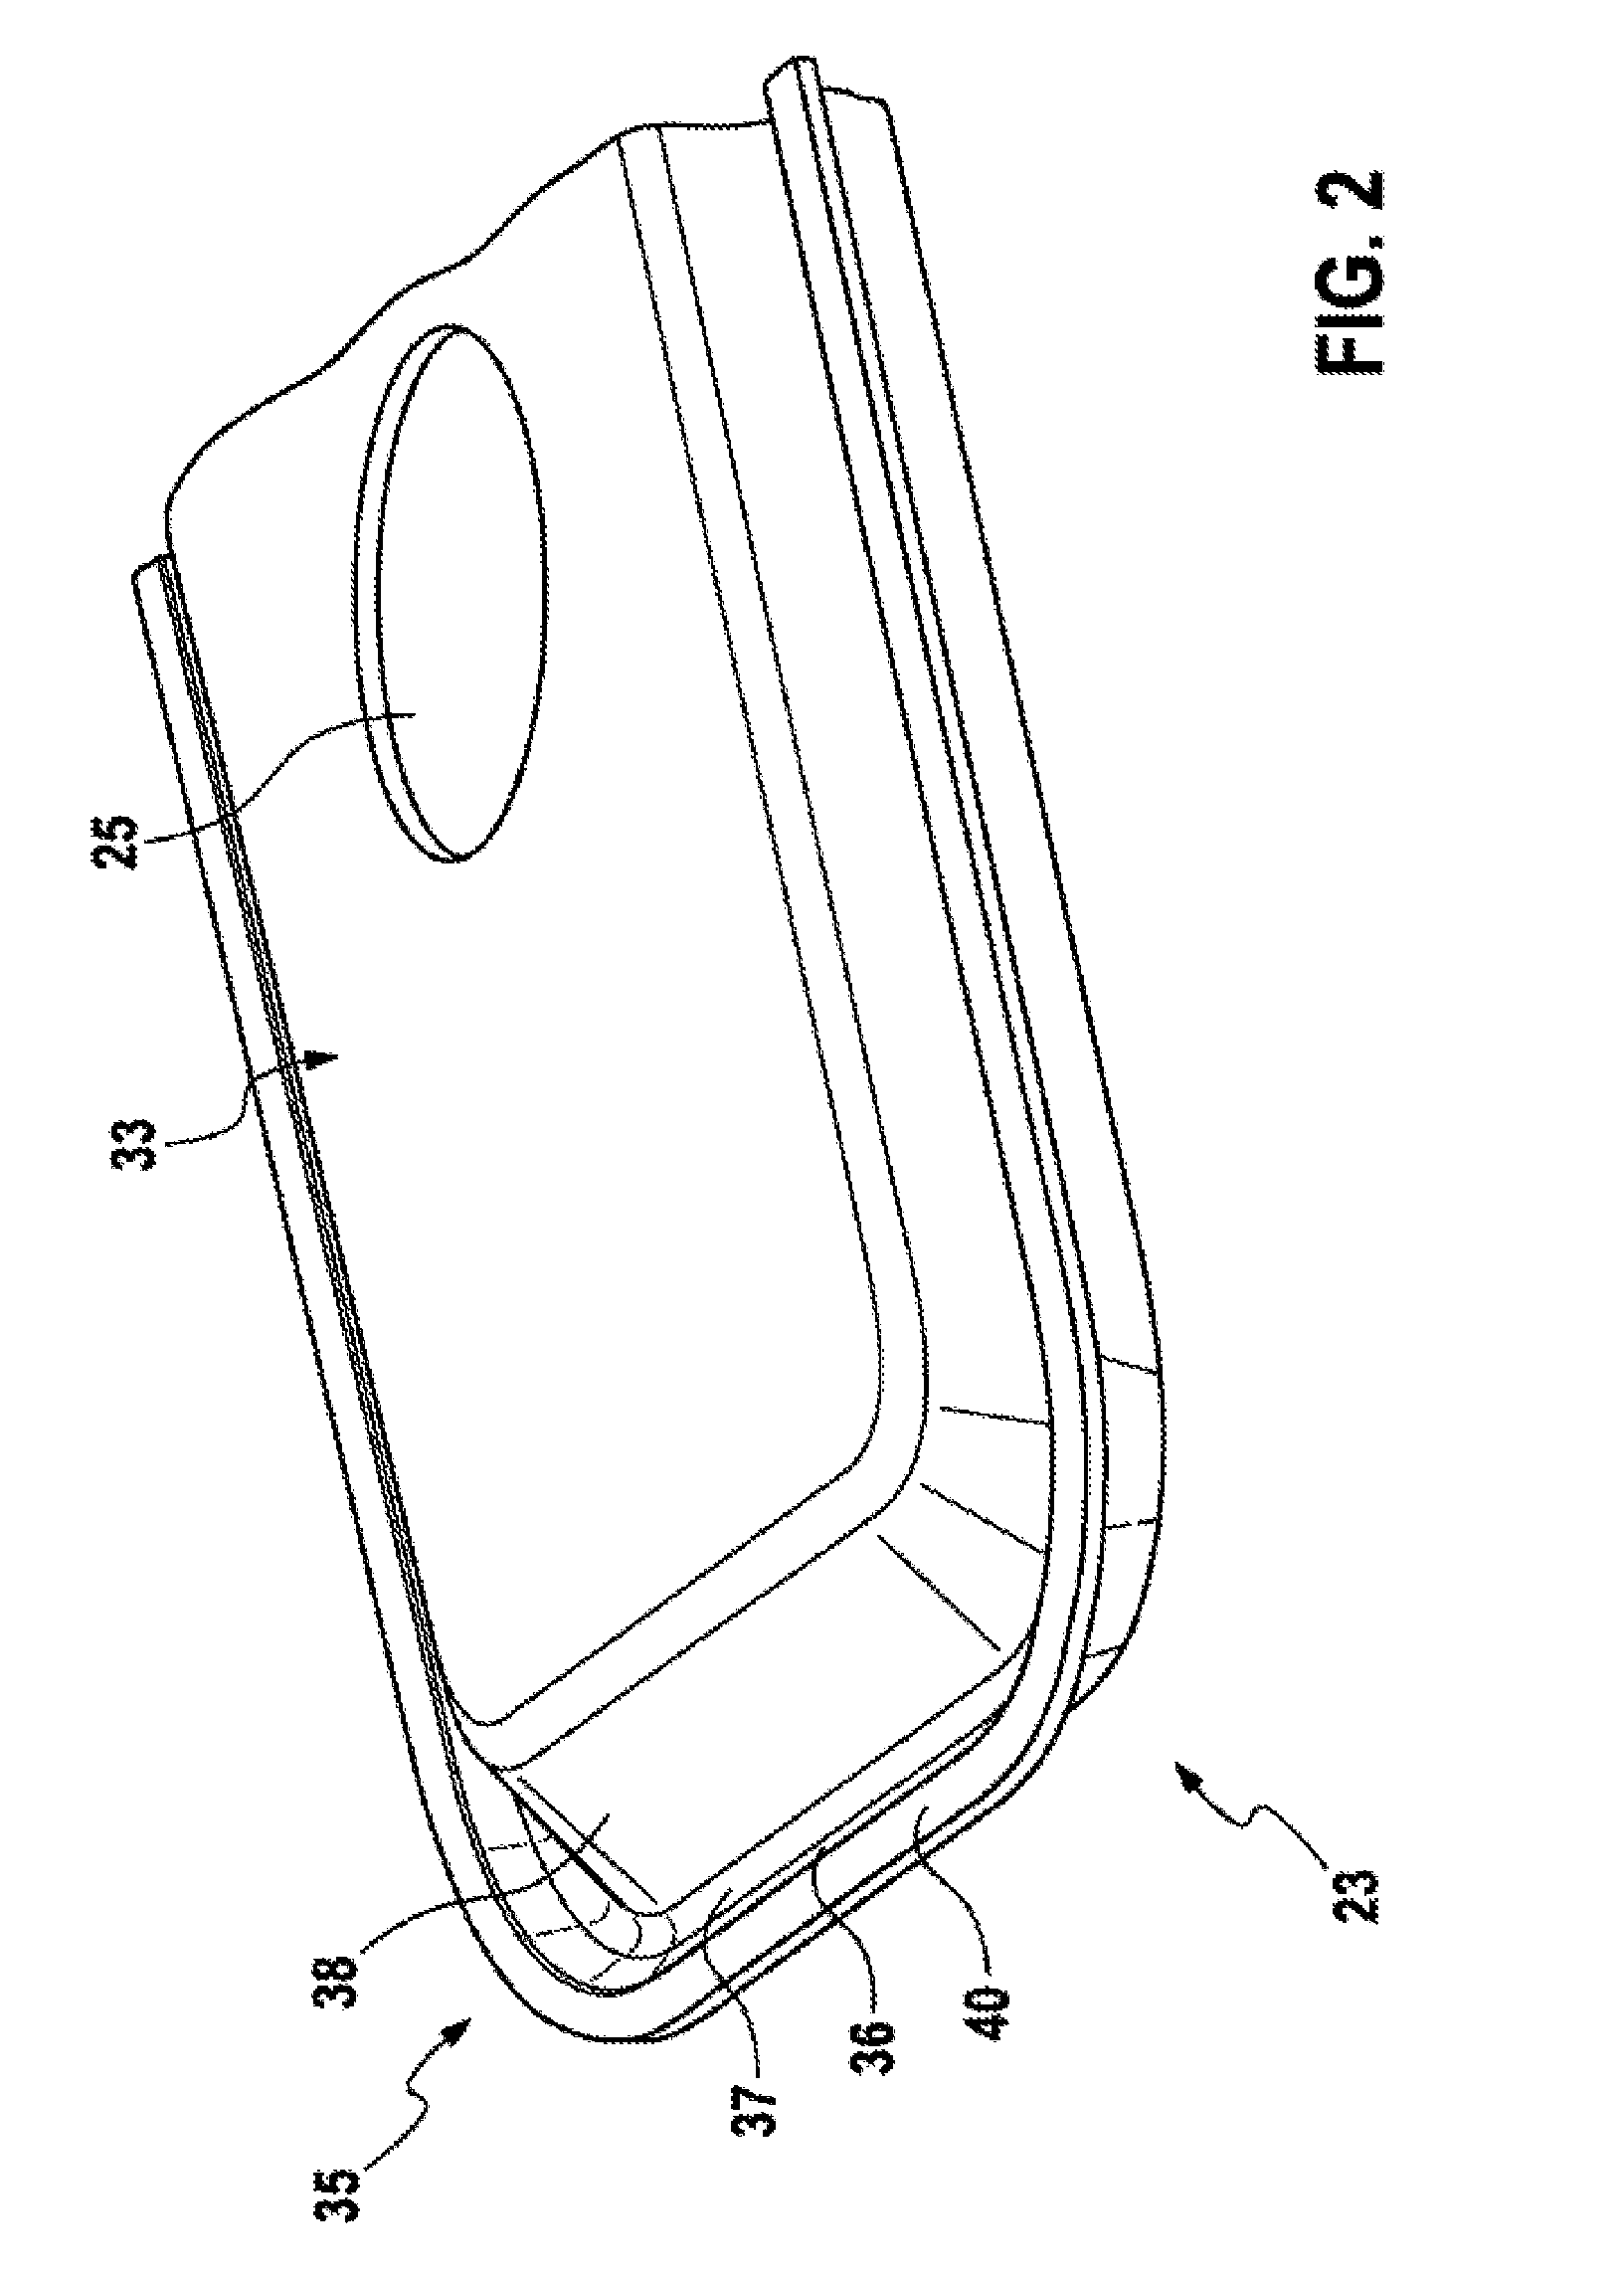 Battery cell comprising a housing covering plate having a raised central region